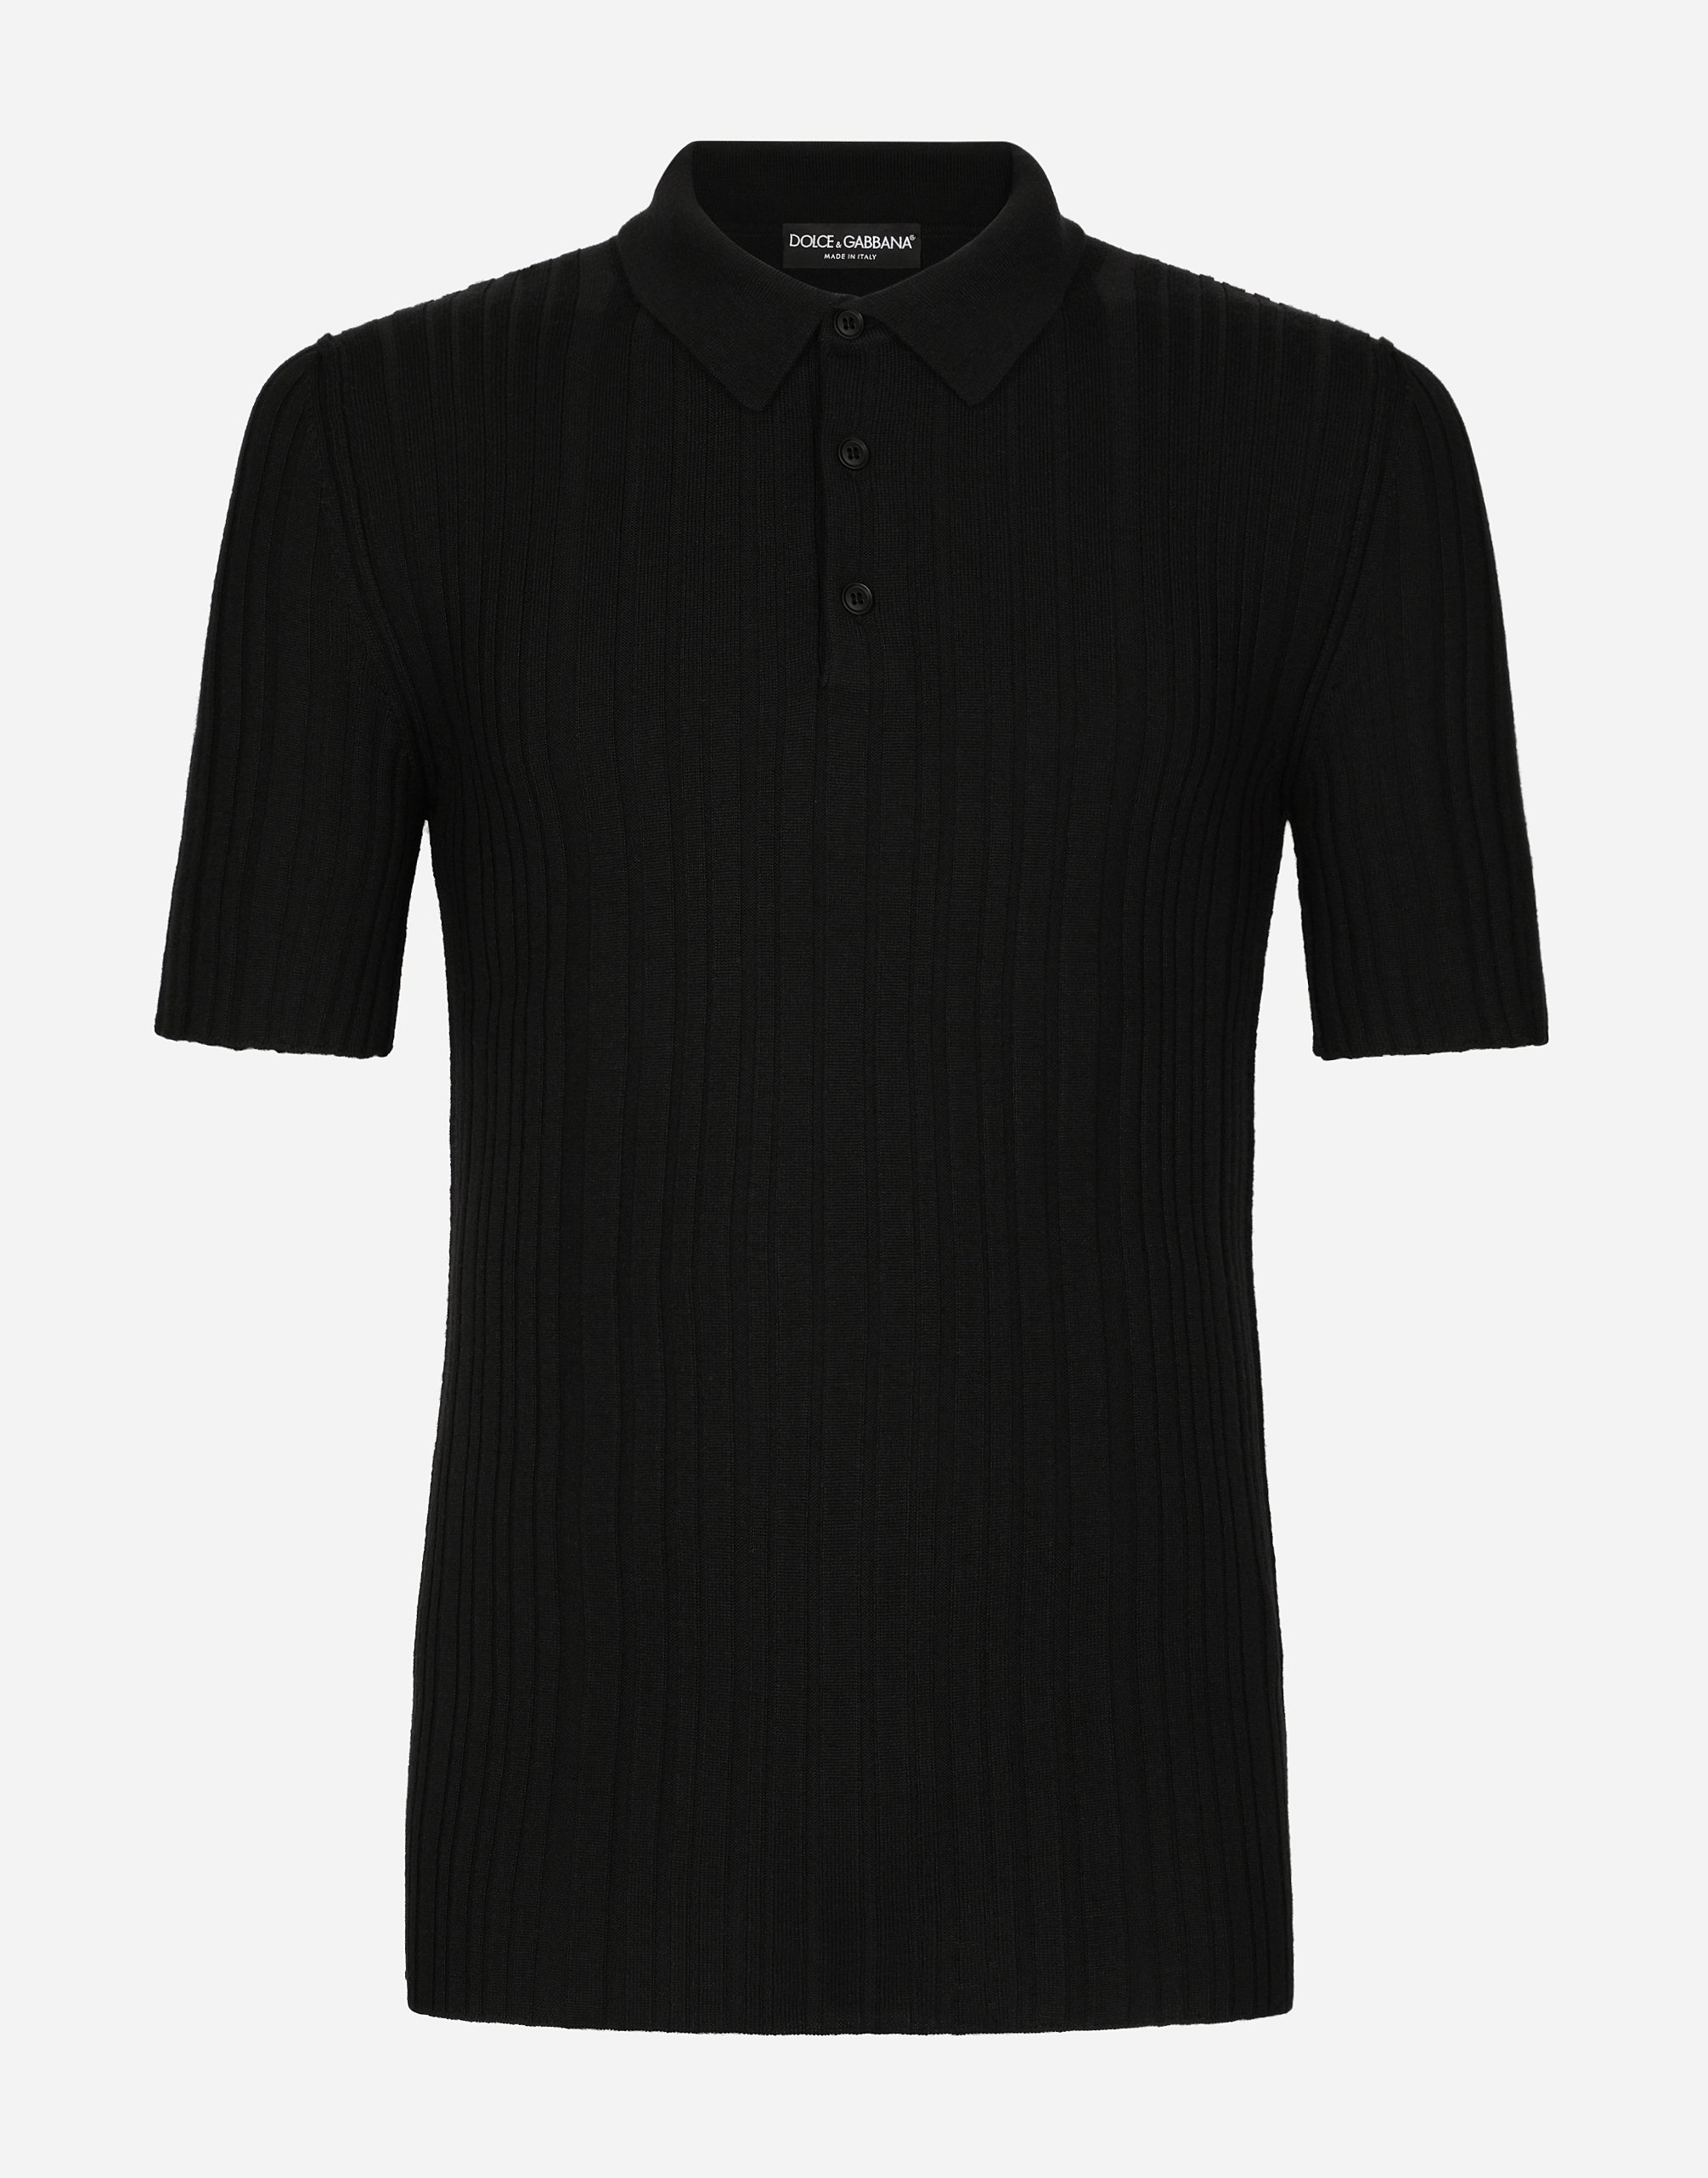 Wool knit polo shirt in Black